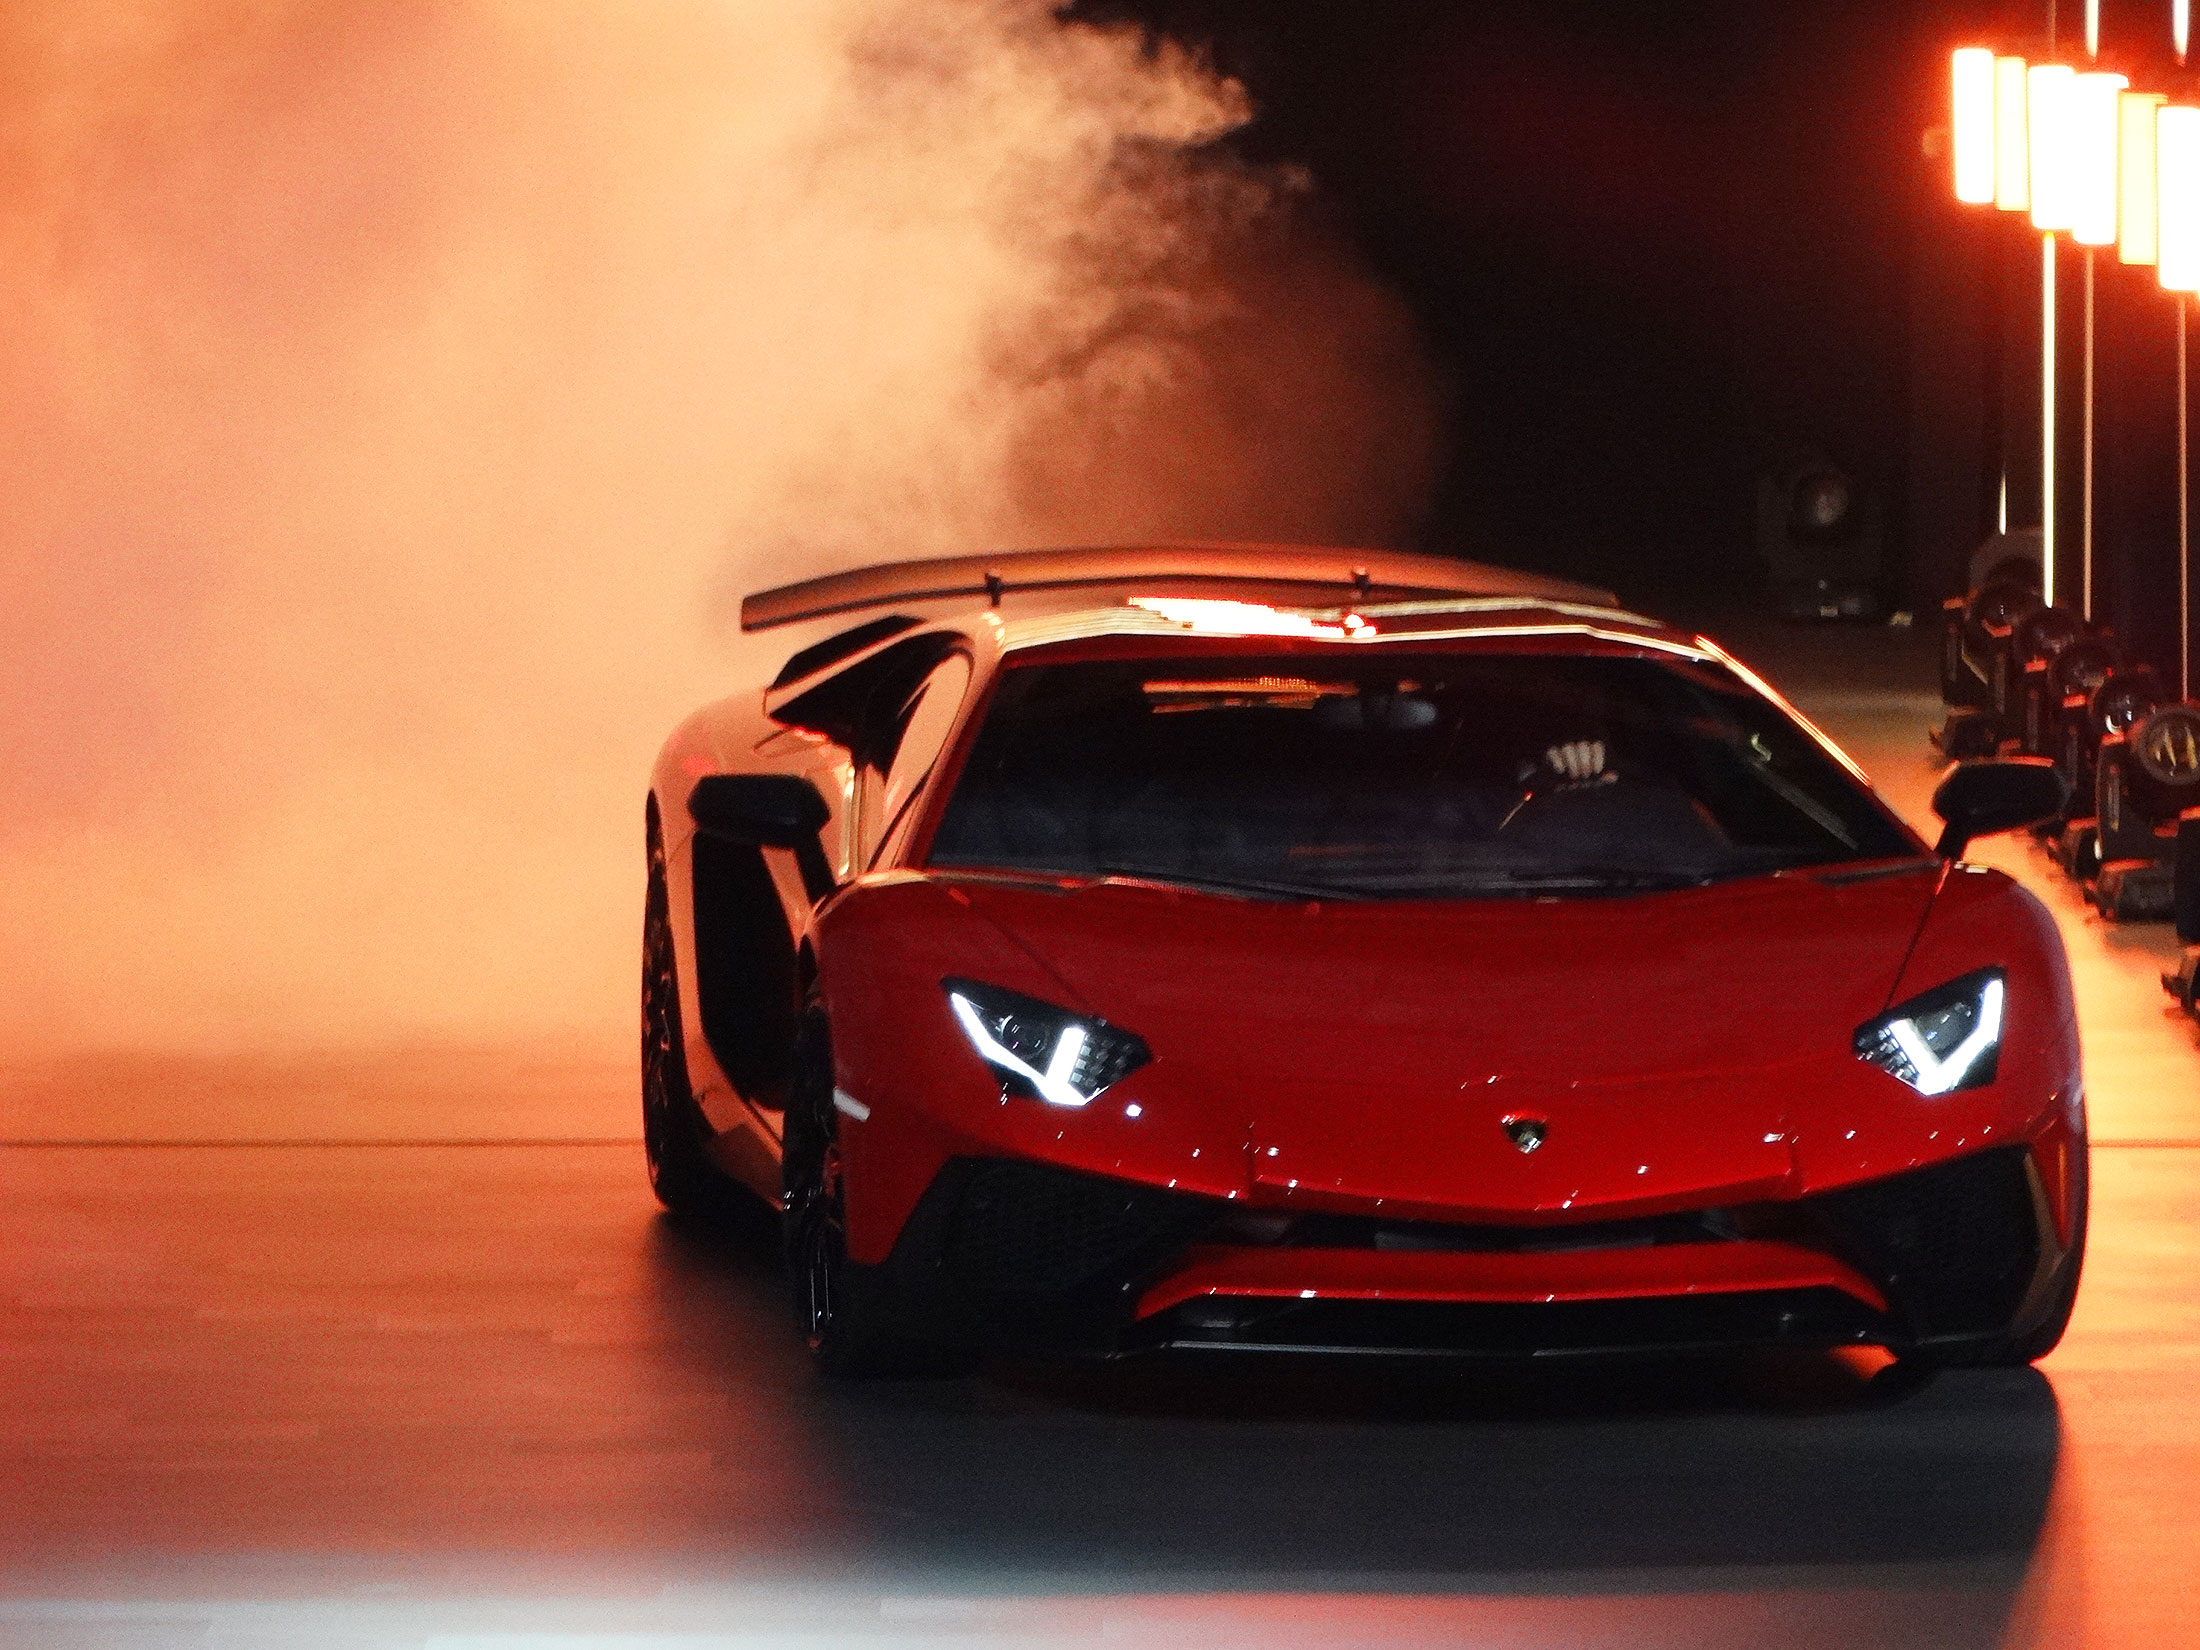 Lamborghini - Ever witnessed a masterpiece sculpted by thunder and